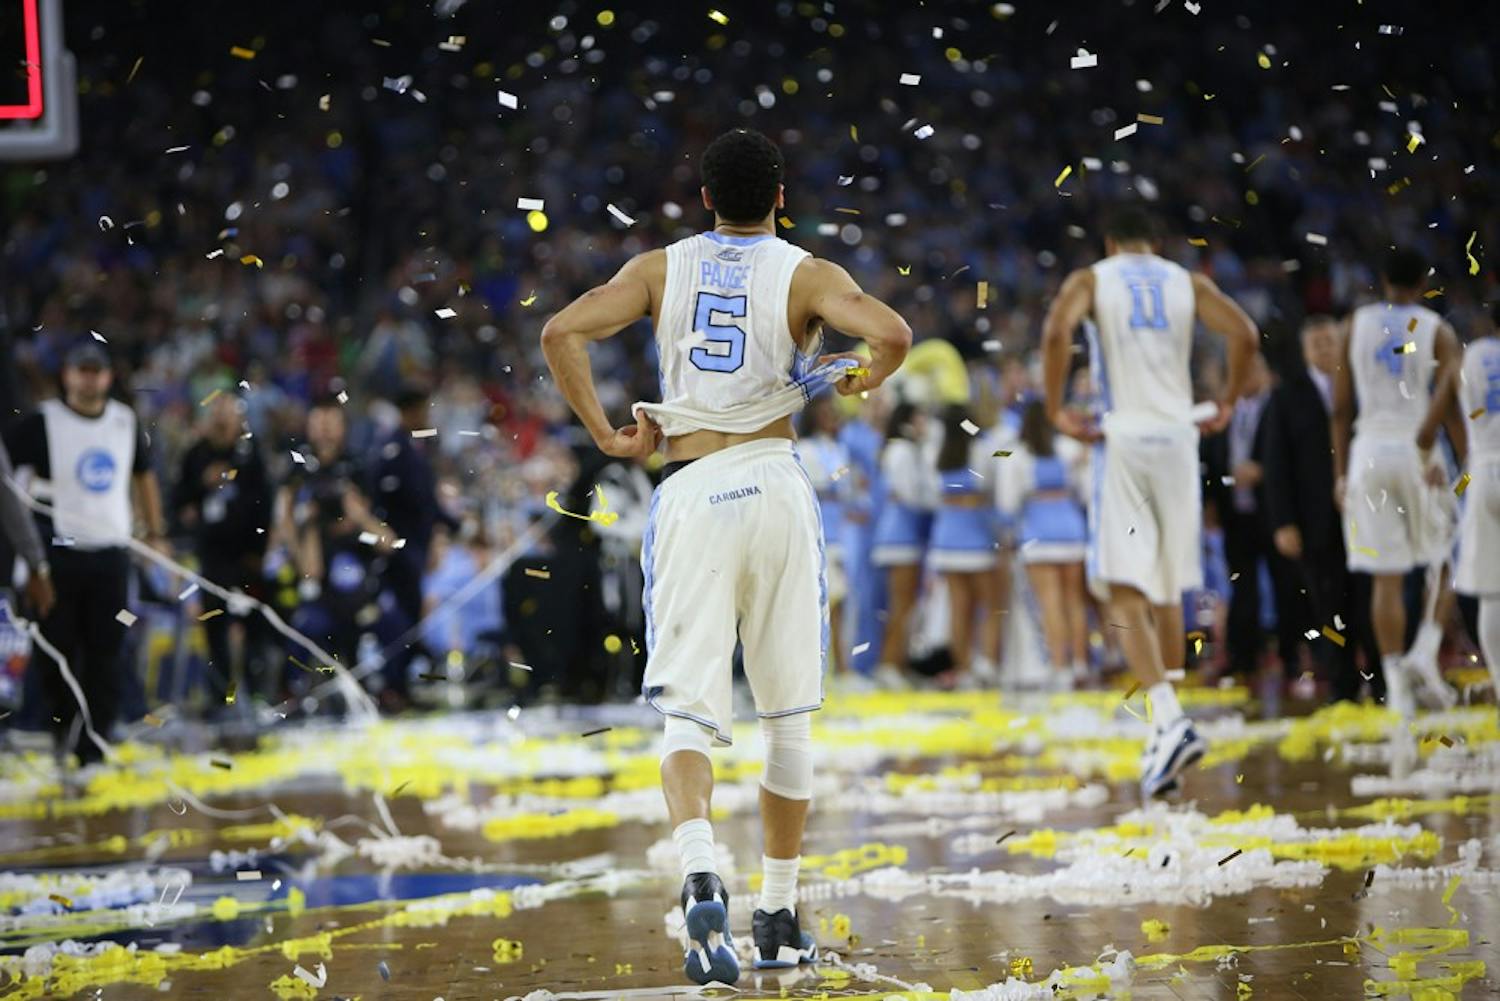 Former UNC seniors Marcus Paige (5) and Brice Johnson (11) walk off the court after falling to Villanova 67-64 in the NCAA National Championship game on April 4.